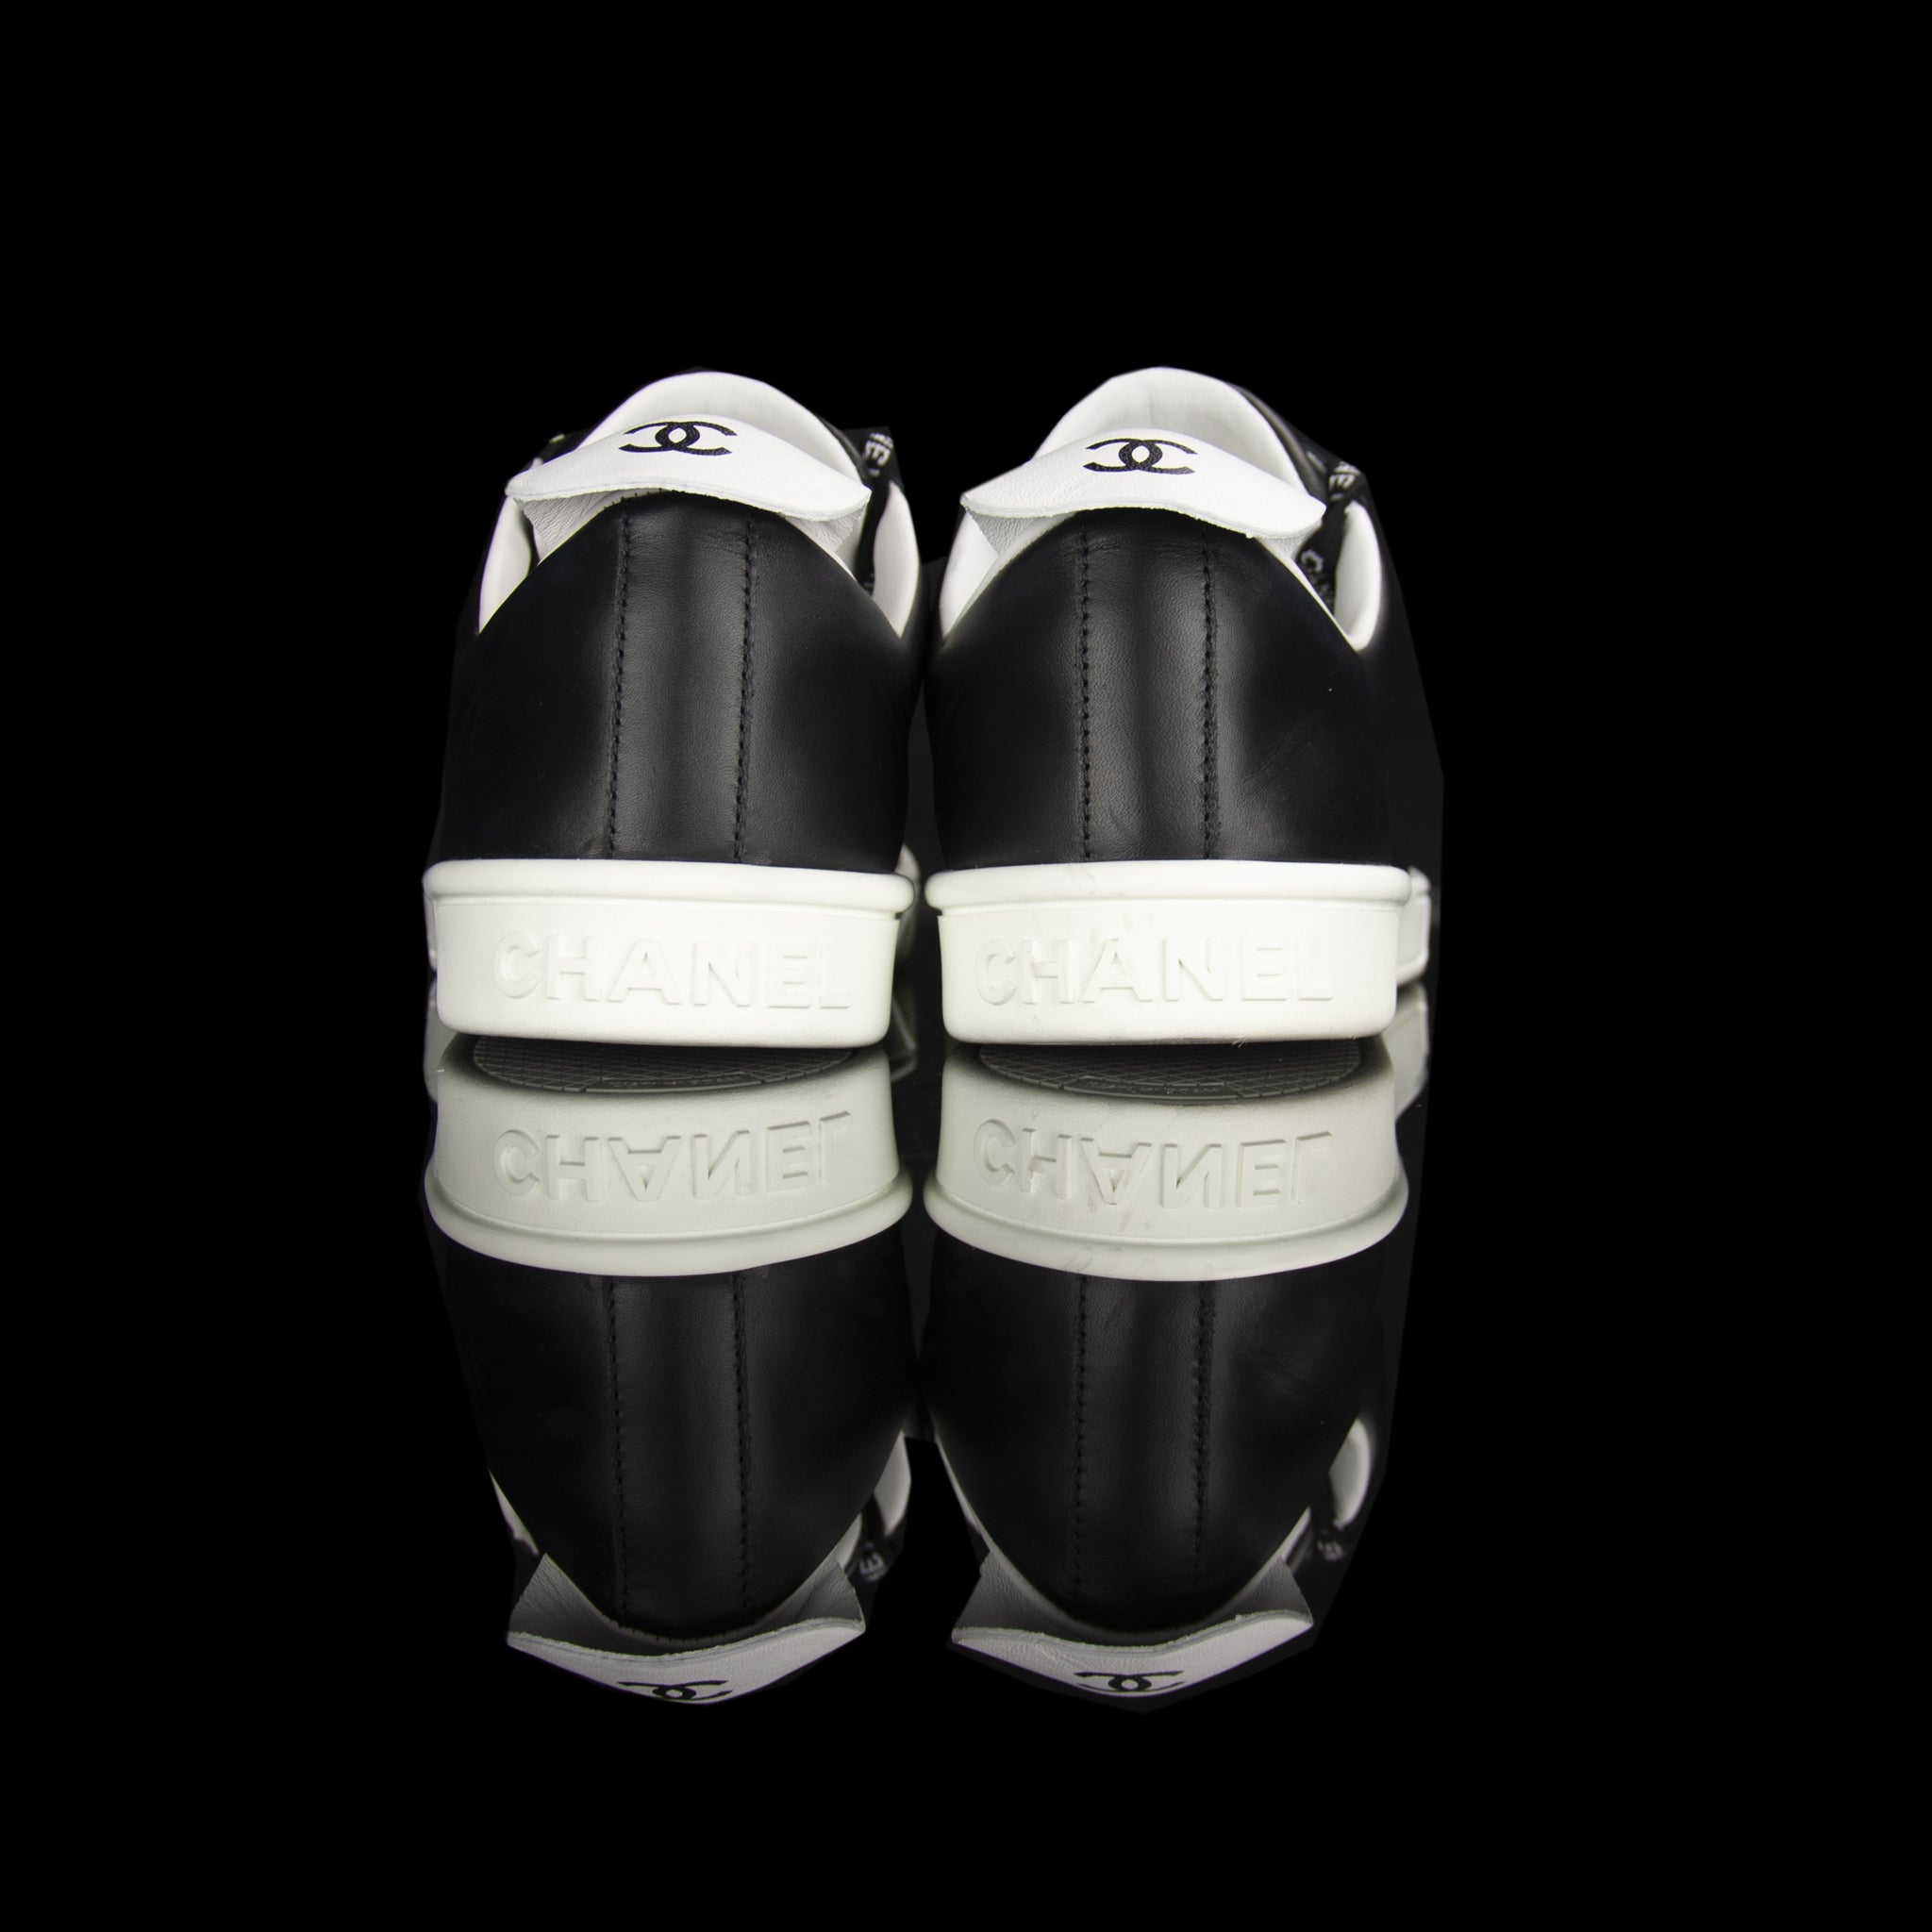 Chanel-Weekend sneakers-Colour: Black, White Mid Sole, White outer sole Limited Edition Calfskin Leather Chanel text on laces White Pull tab Black CC Logo on pull tab-fabriqe.com